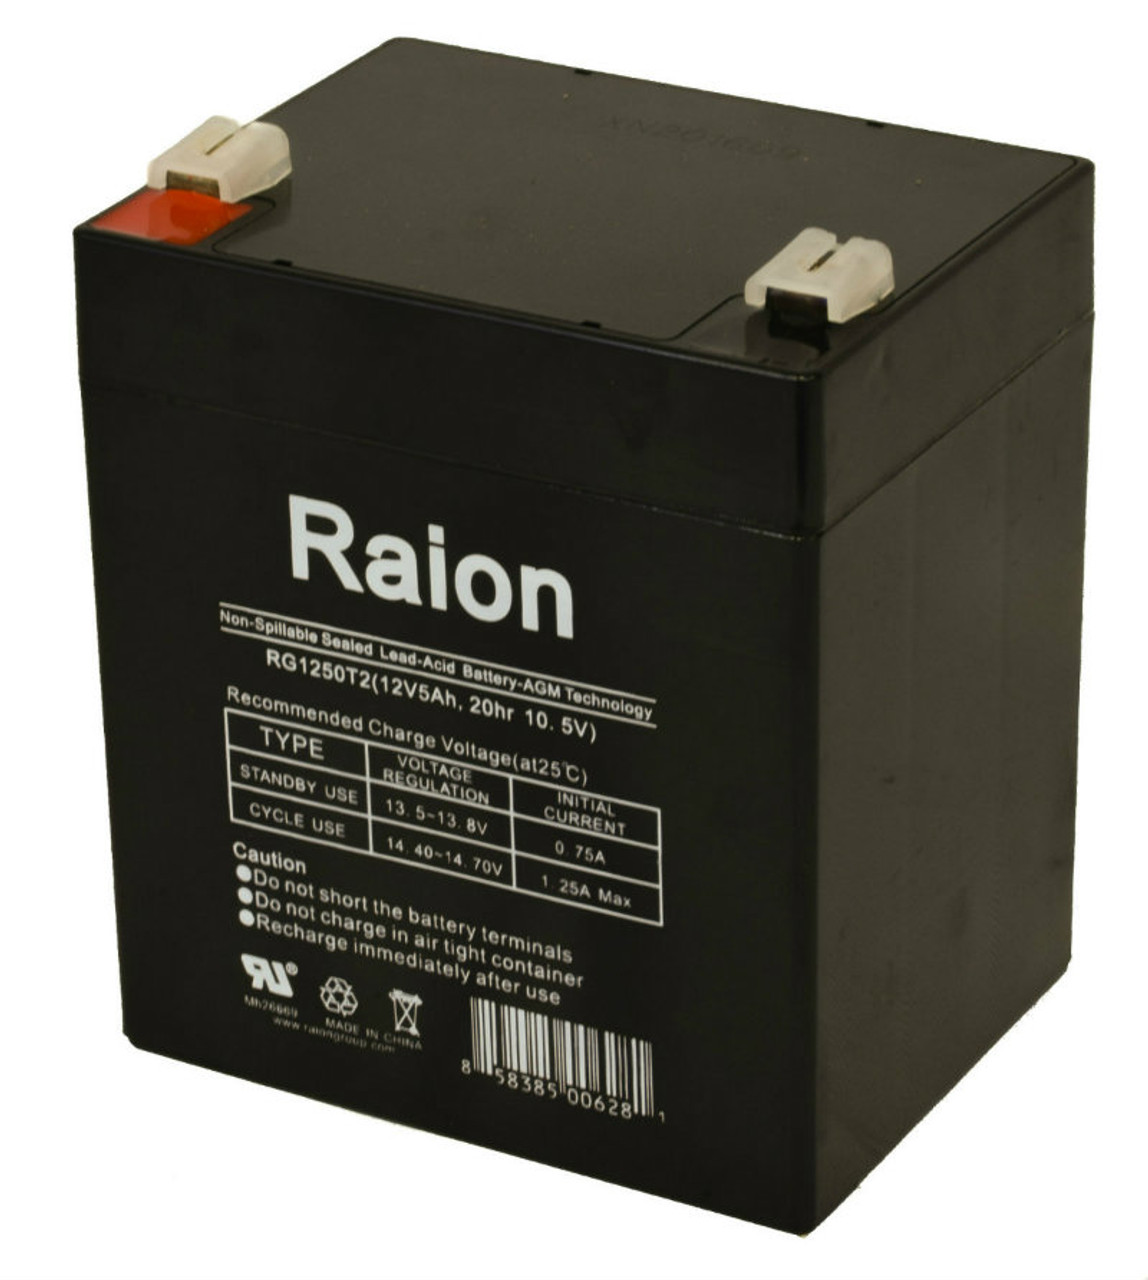 Raion Power RG1250T1 Replacement Fire Alarm Control Panel Battery for Napco Alarms MA1008E